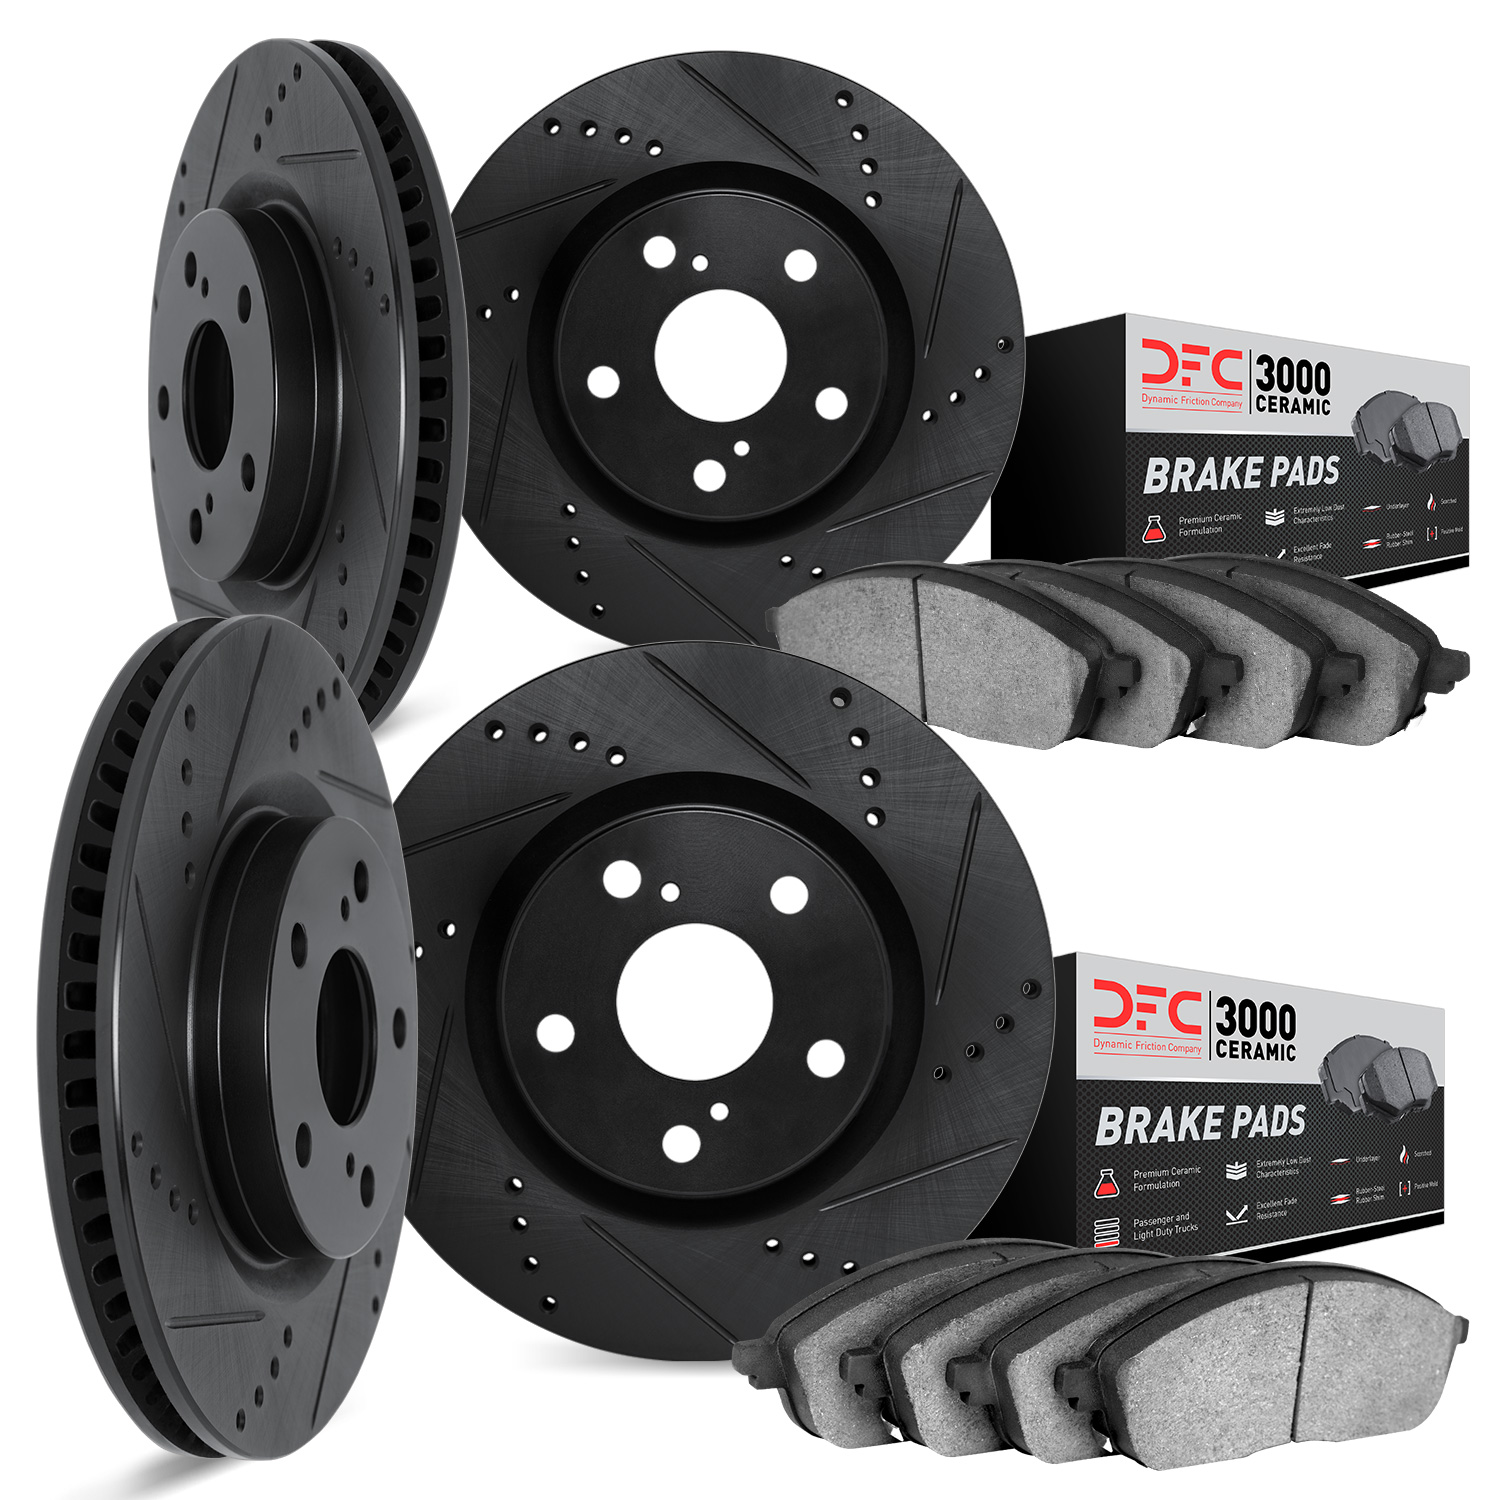 8304-31081 Drilled/Slotted Brake Rotors with 3000-Series Ceramic Brake Pads Kit [Black], 2013-2013 BMW, Position: Front and Rear